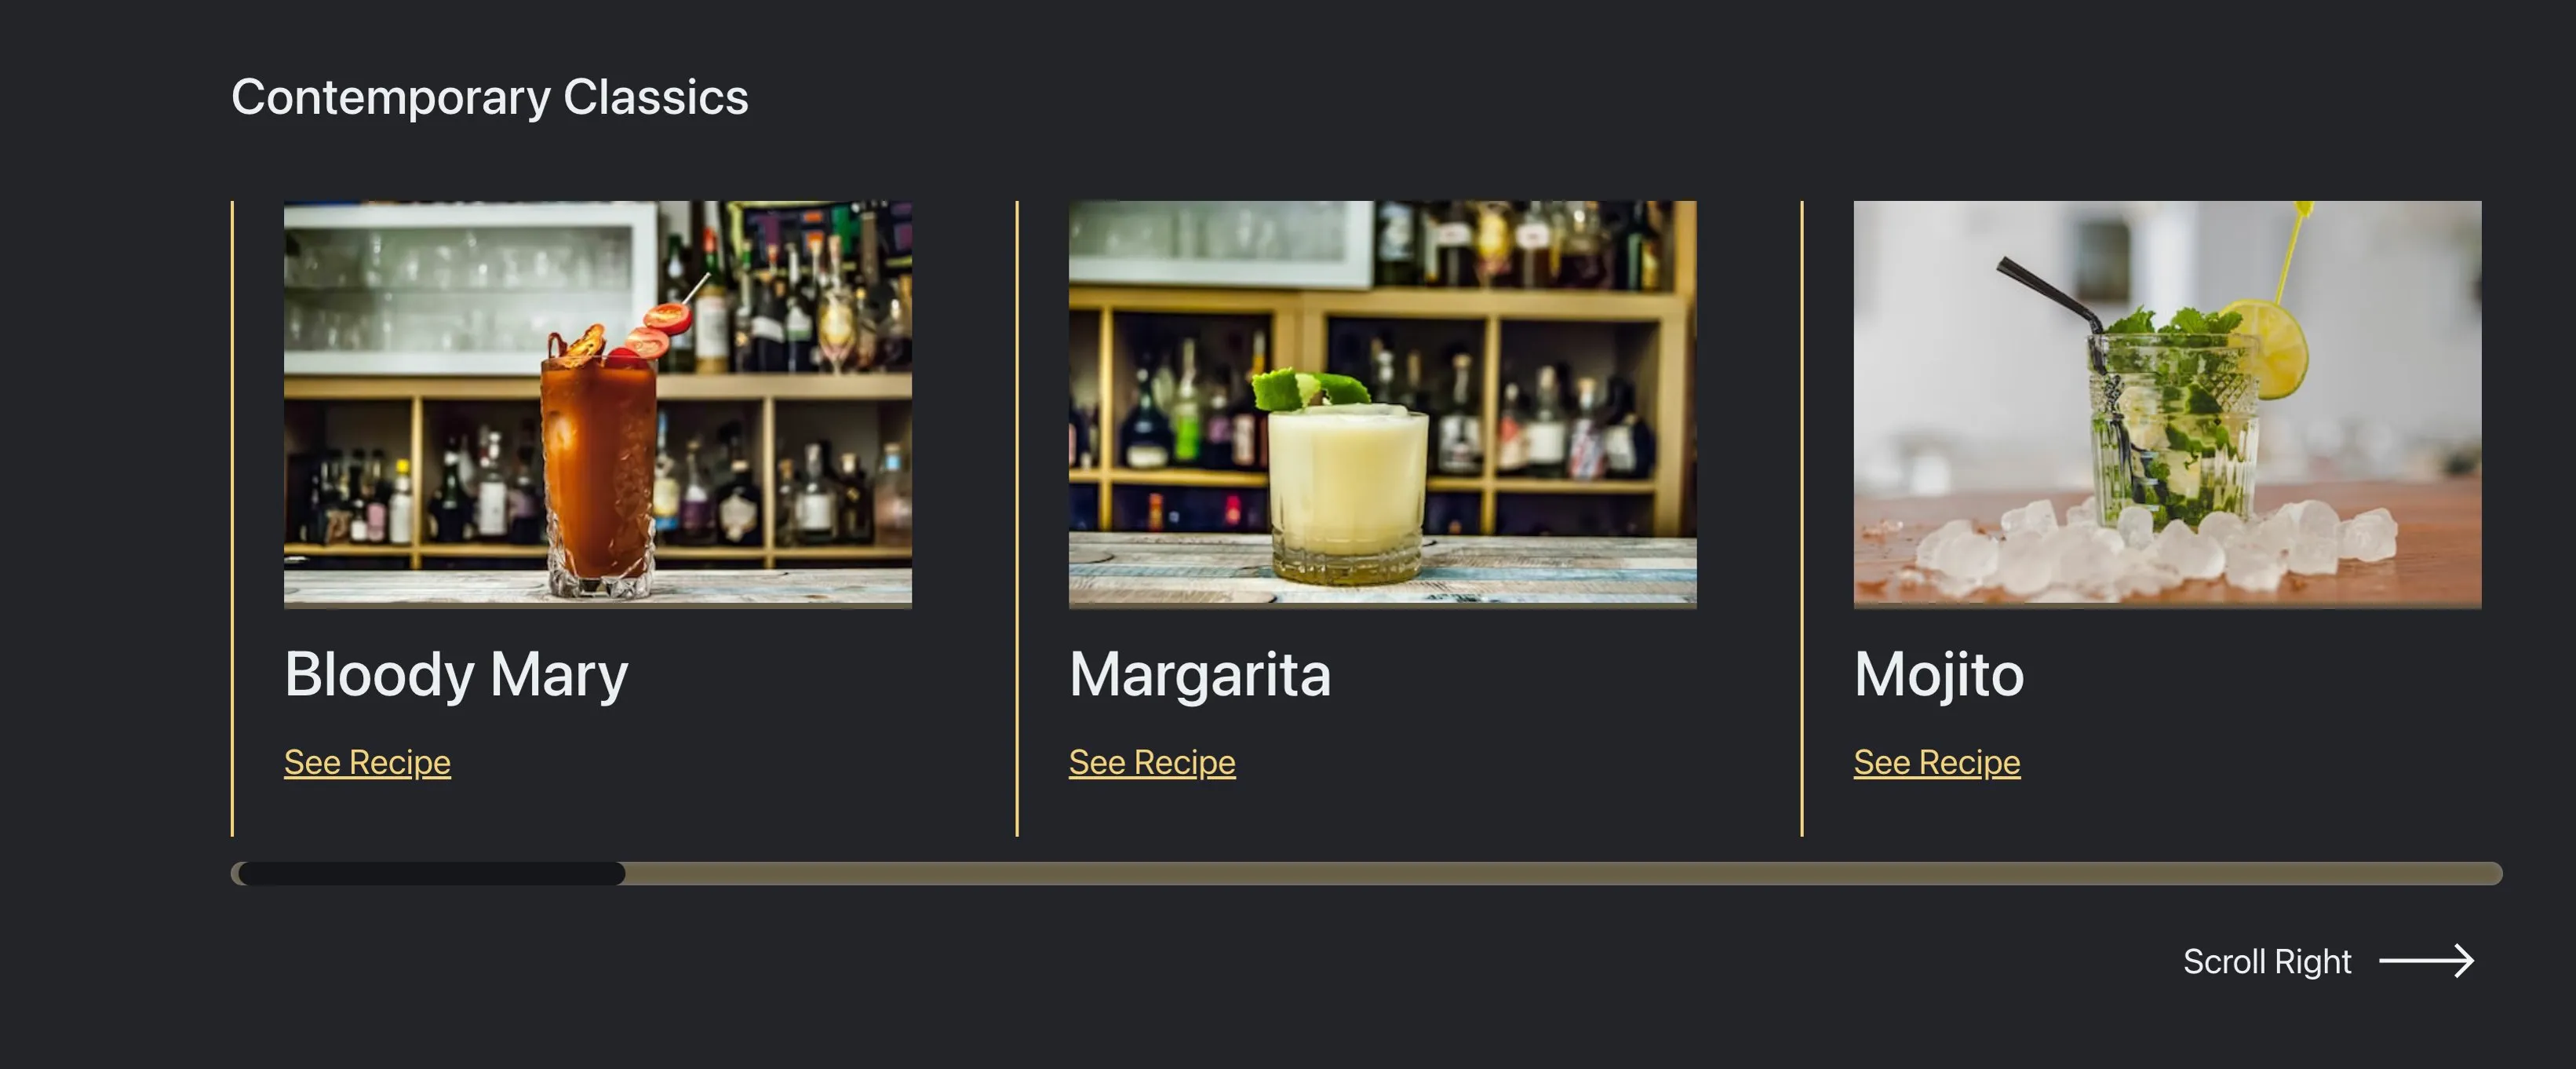 Screenshot of the page of recipes from theCocktailApp